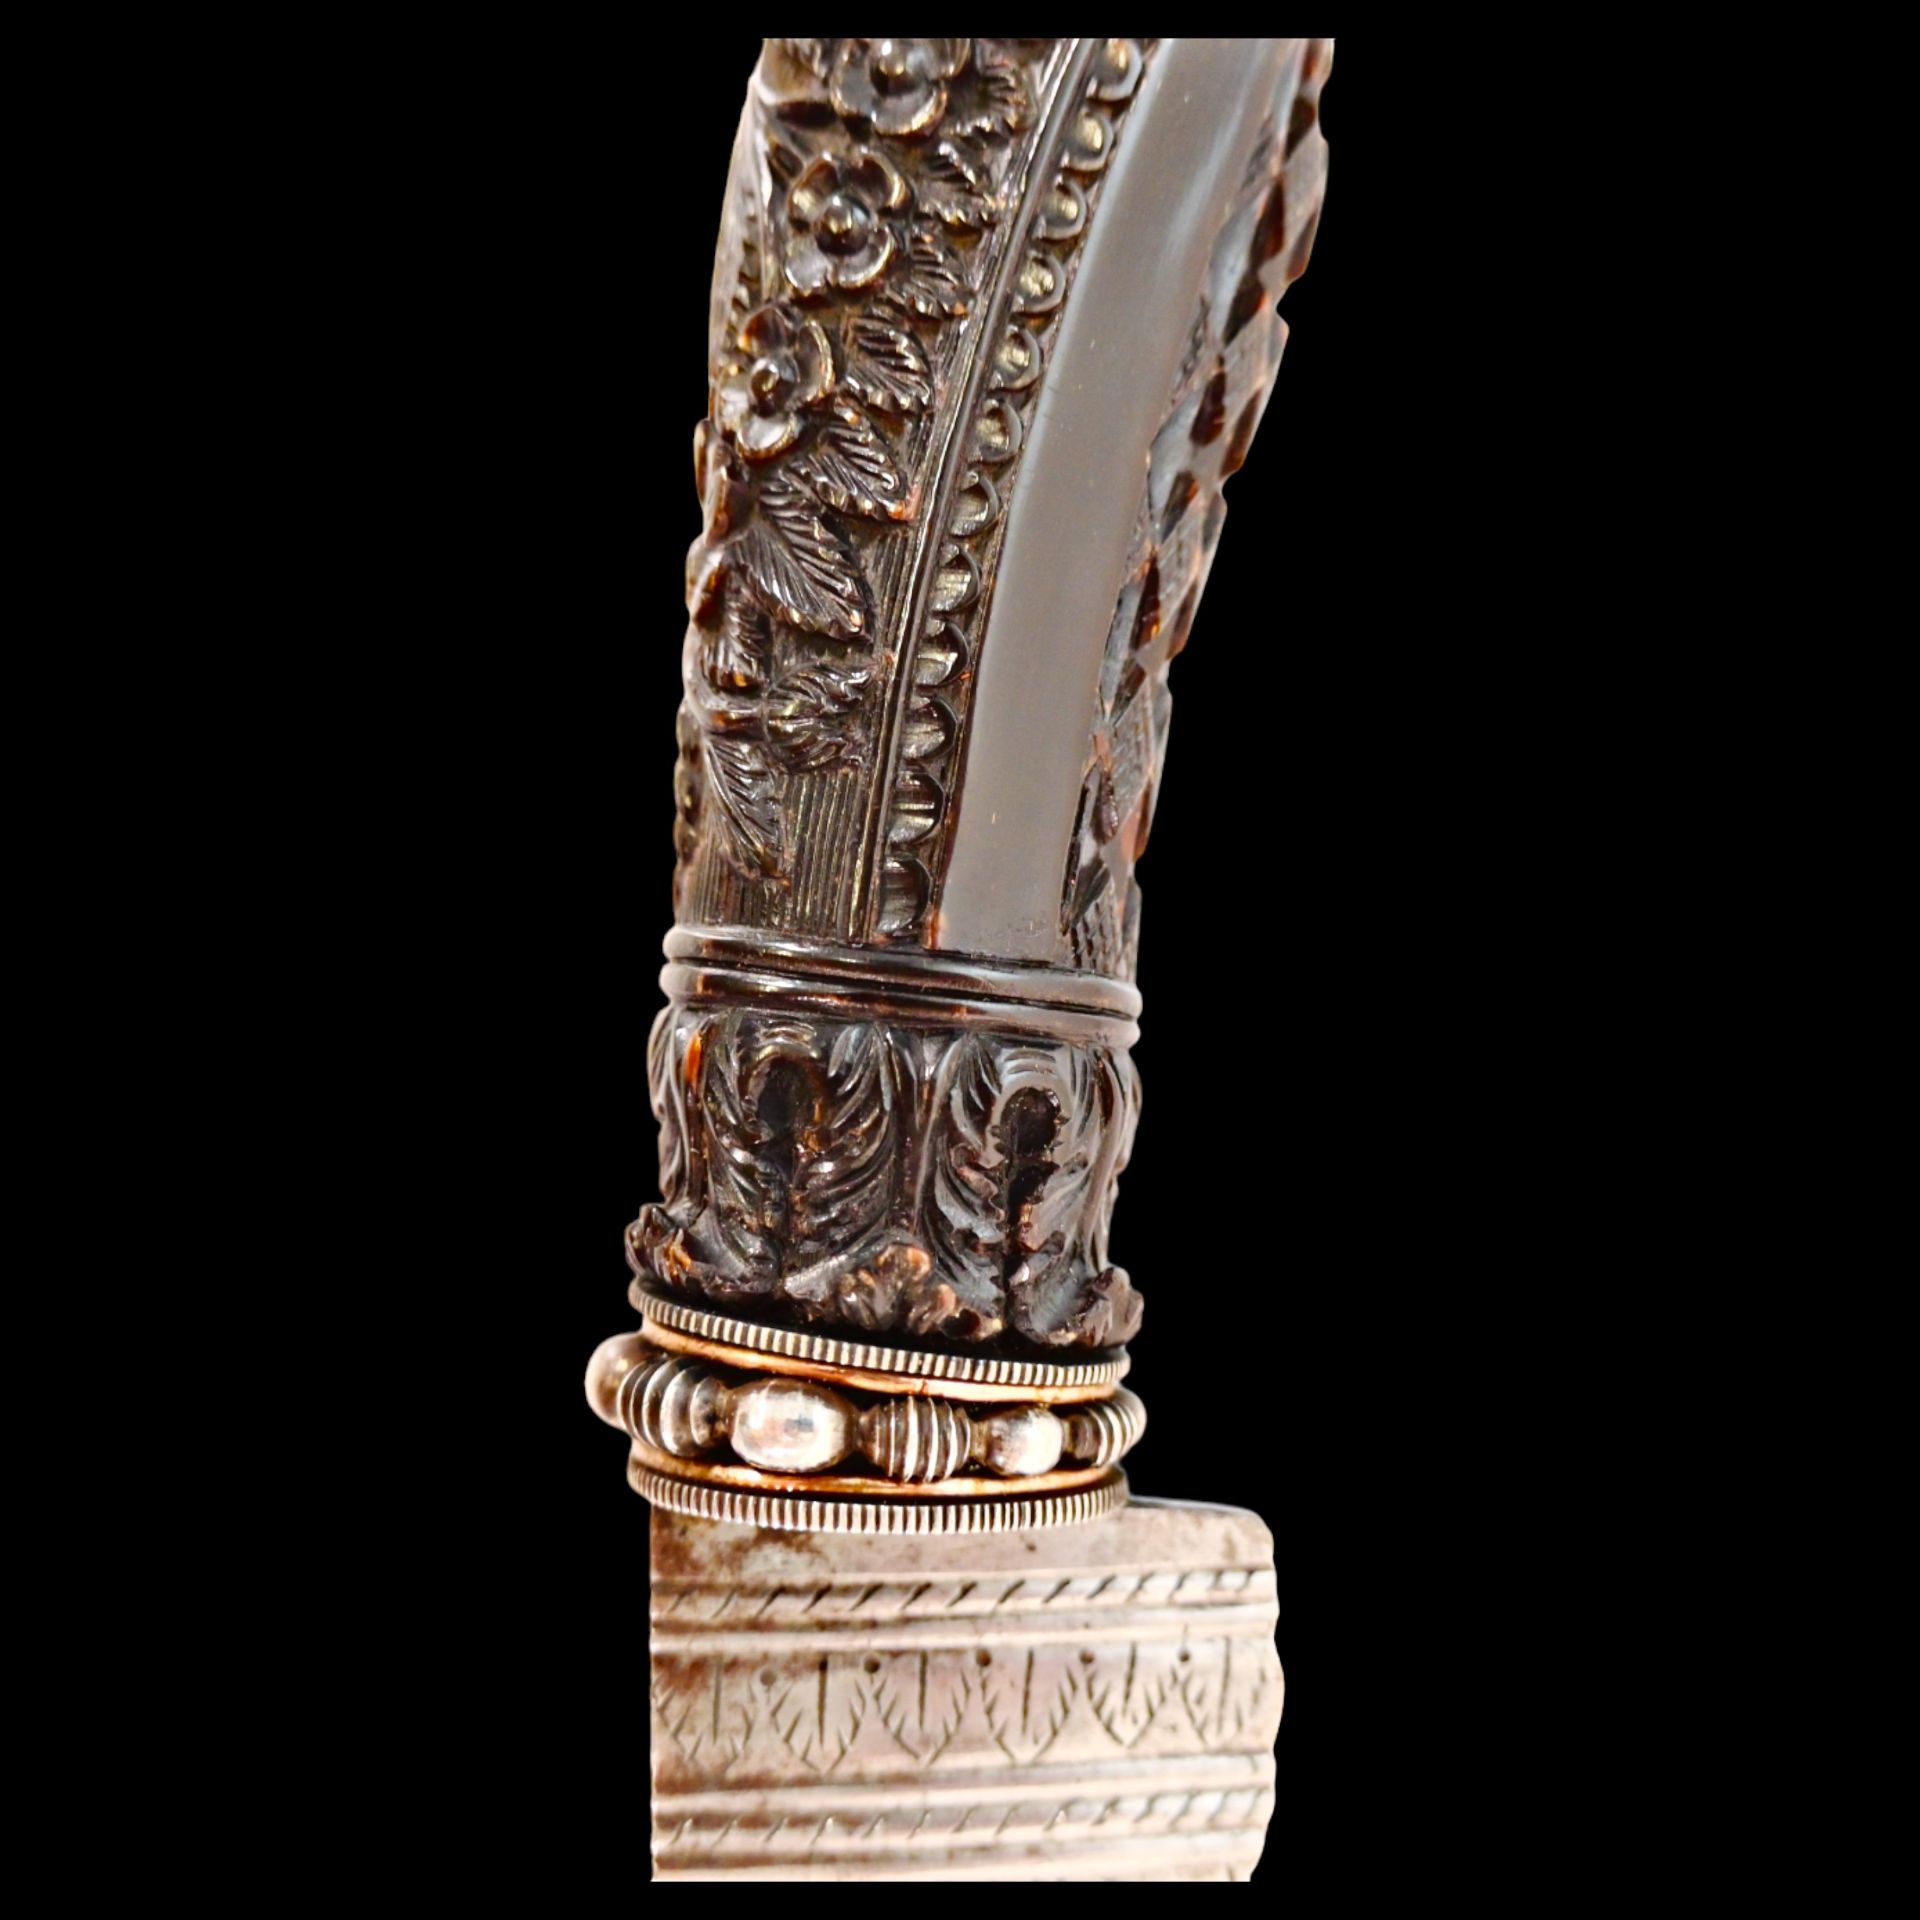 Magnificent, richly decorated knife, Indonesia, first half of the 20th century. - Image 21 of 33